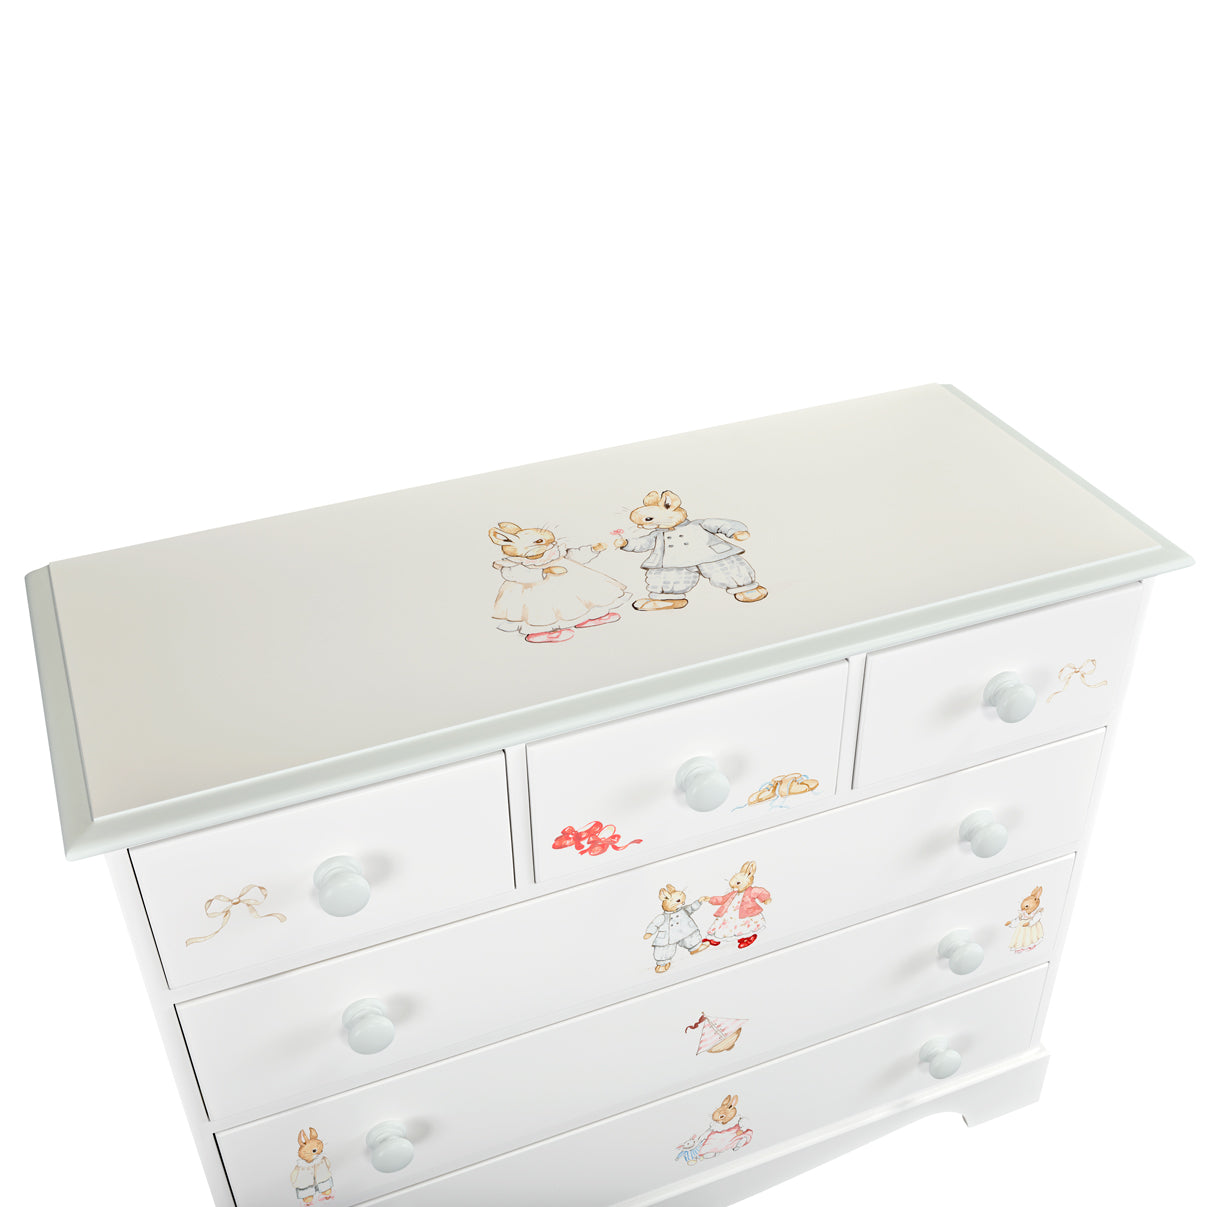 Extra Large Chest of Drawers - Designer Bunnies with Chic Grey Trim